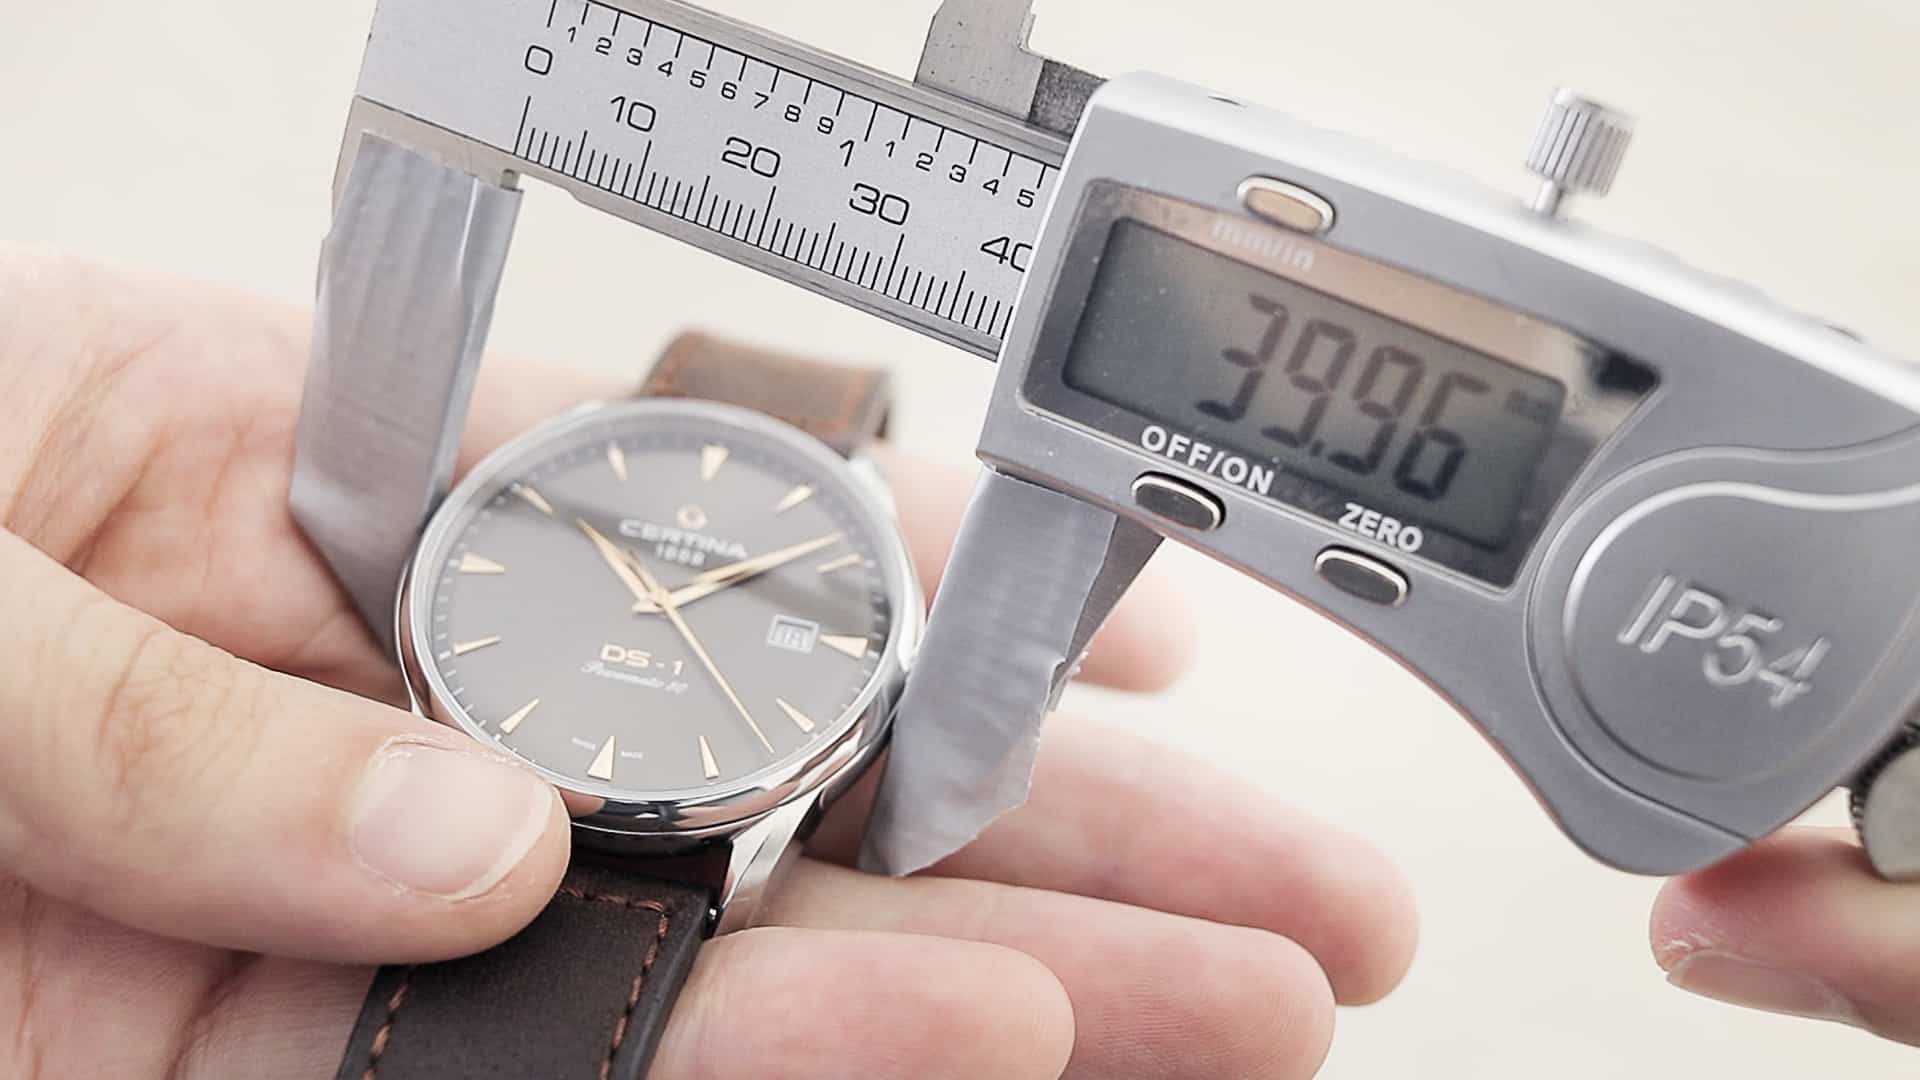 How To Measure A Watch Case Size Easily-1